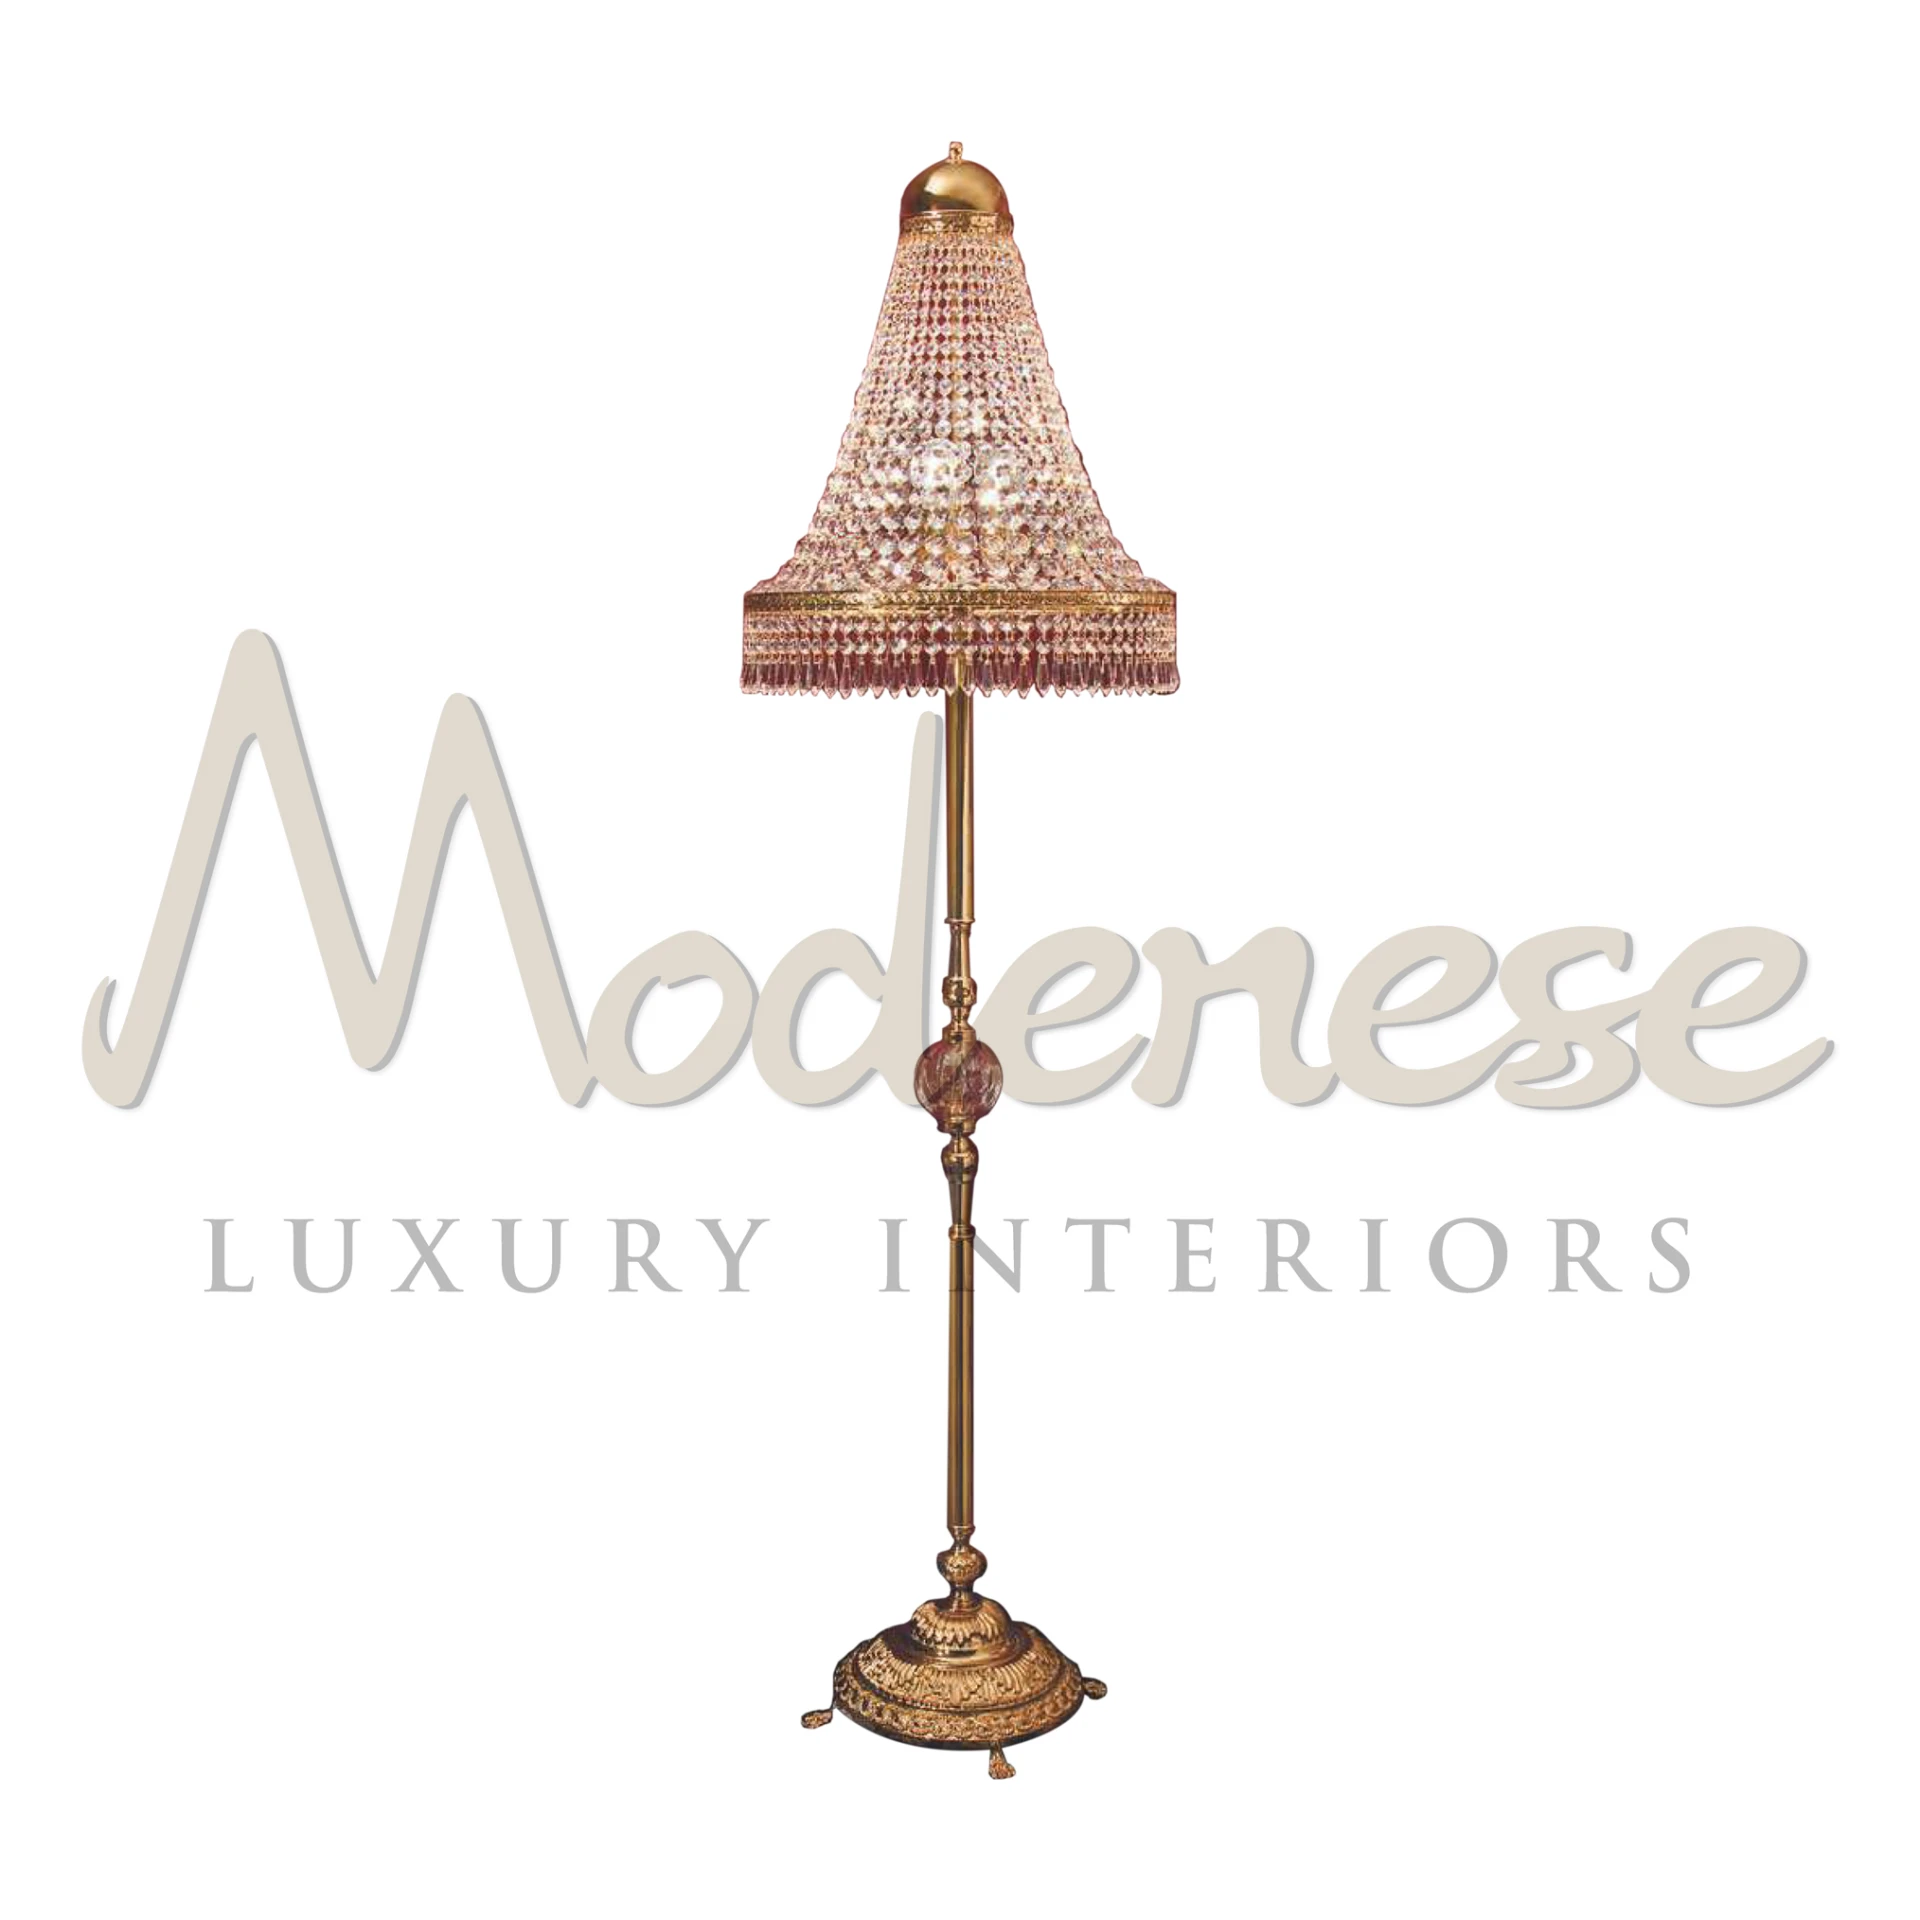 A pink-beaded Scholer Crystals Floor Lamp with a luxurious gold stand.